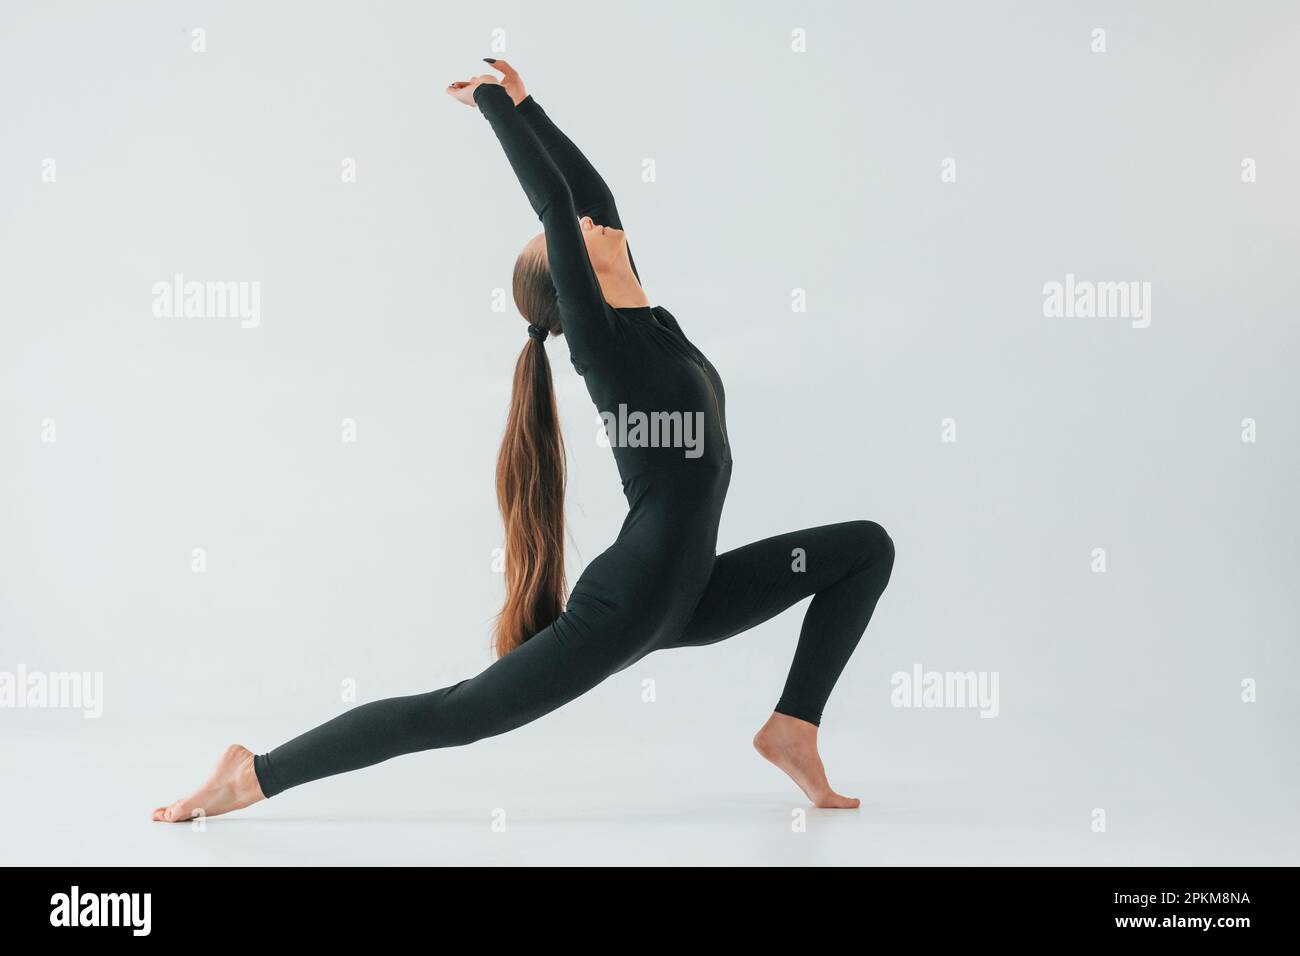 Healthy person. Young woman in sportive clothes doing gymnastics indoors. Stock Photo